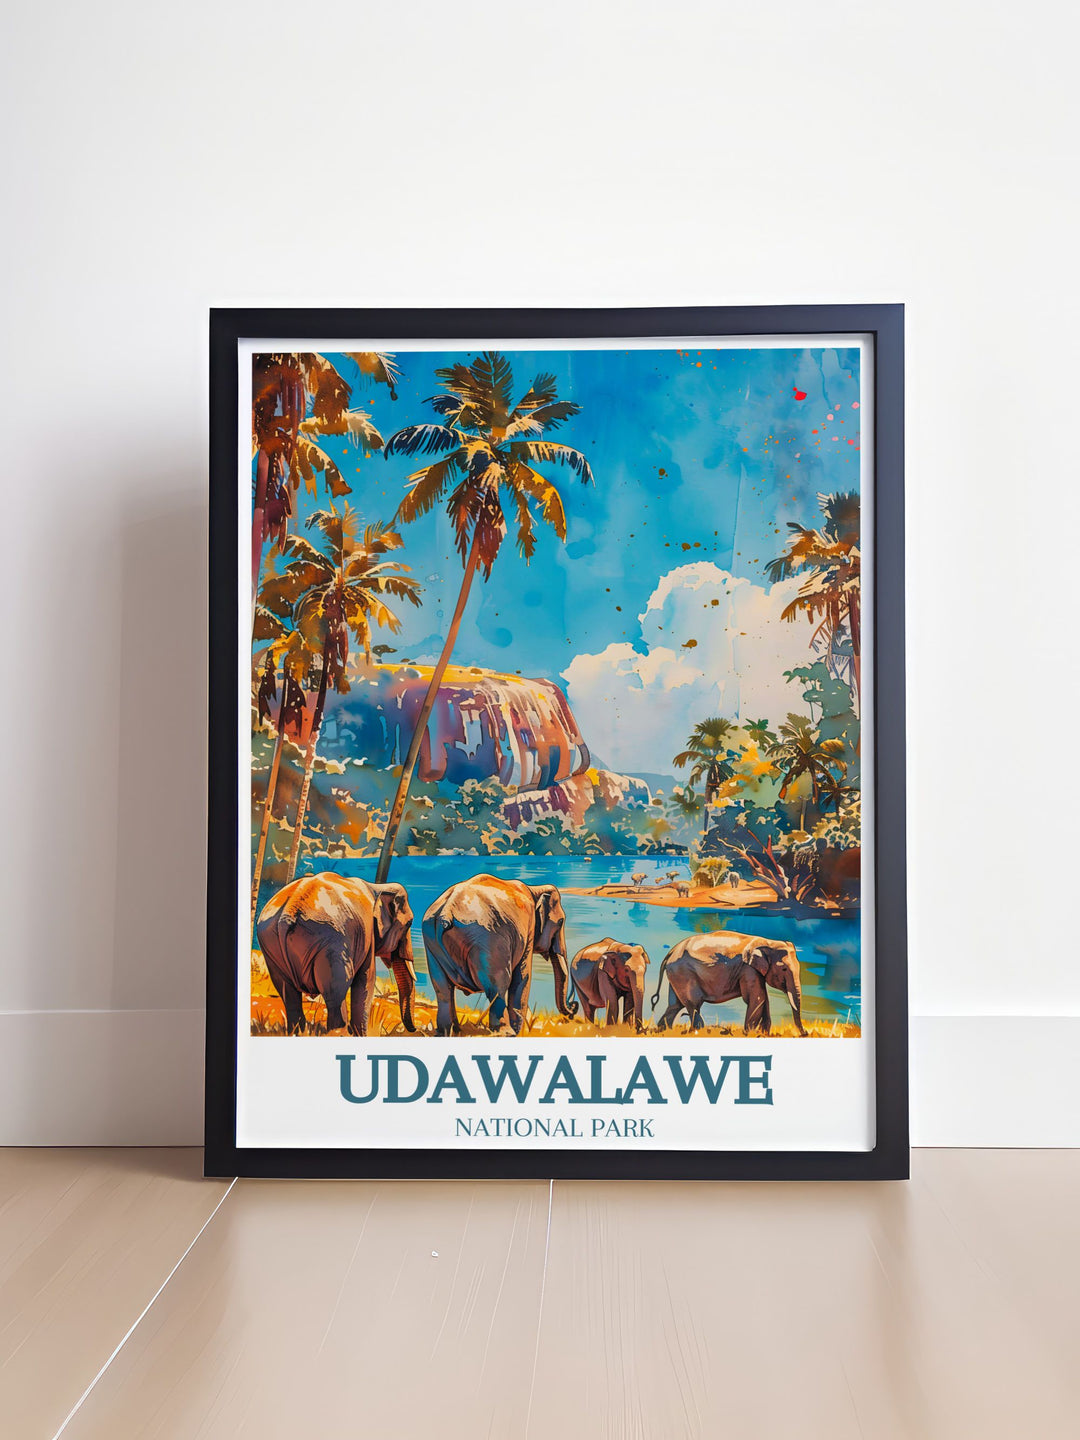 Elegant Udawalawe Reservoir Walawe River poster featuring vibrant colors and detailed artwork ideal for home decor and as a special gift for friends and family who love nature and adventure.